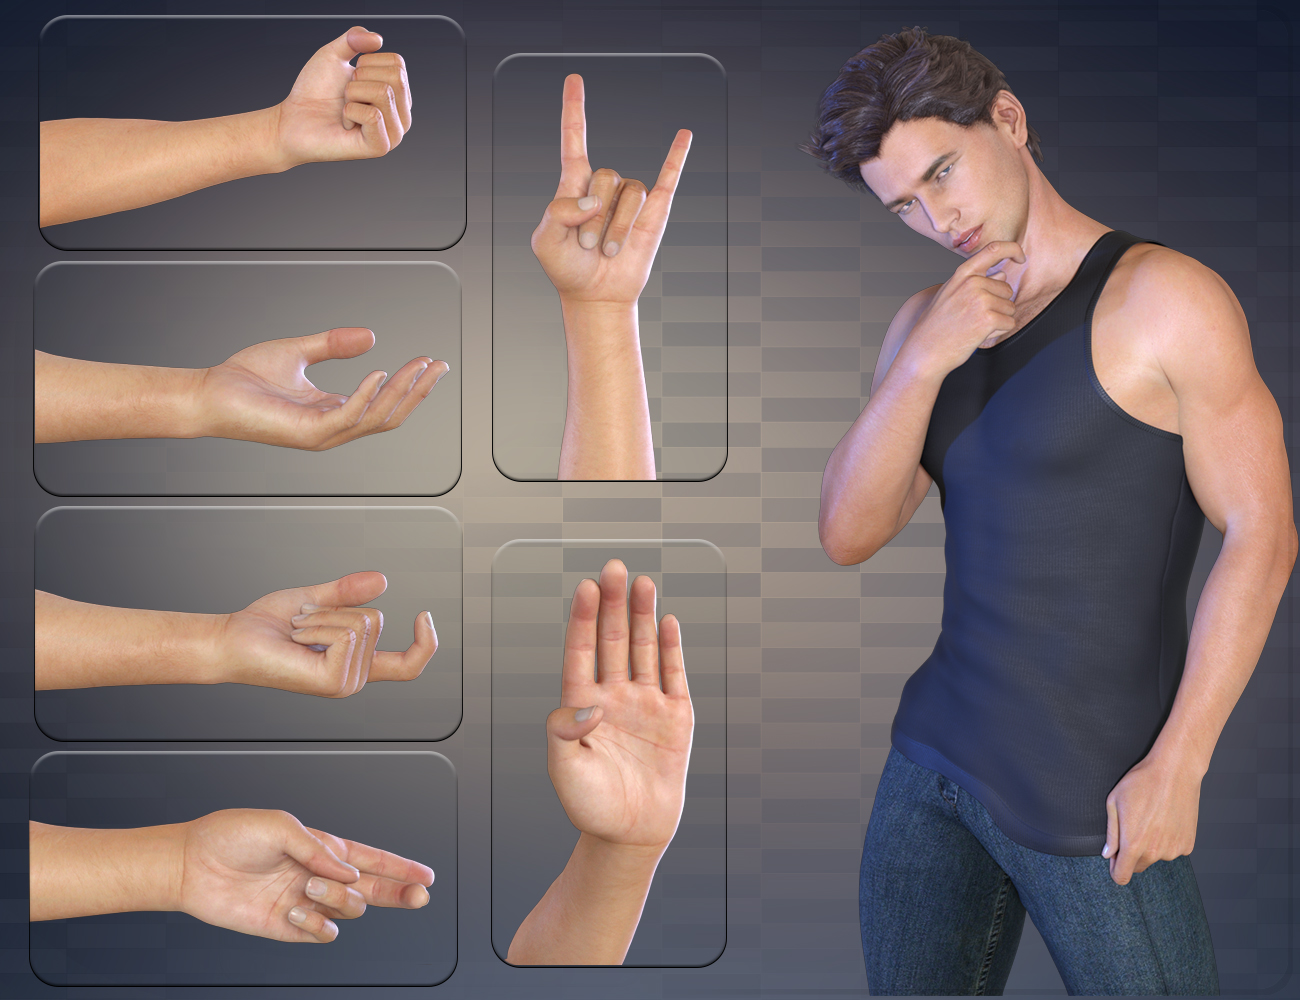 Z In Control - Hand Poses for the Genesis 3 Male(s) by: Zeddicuss, 3D Models by Daz 3D